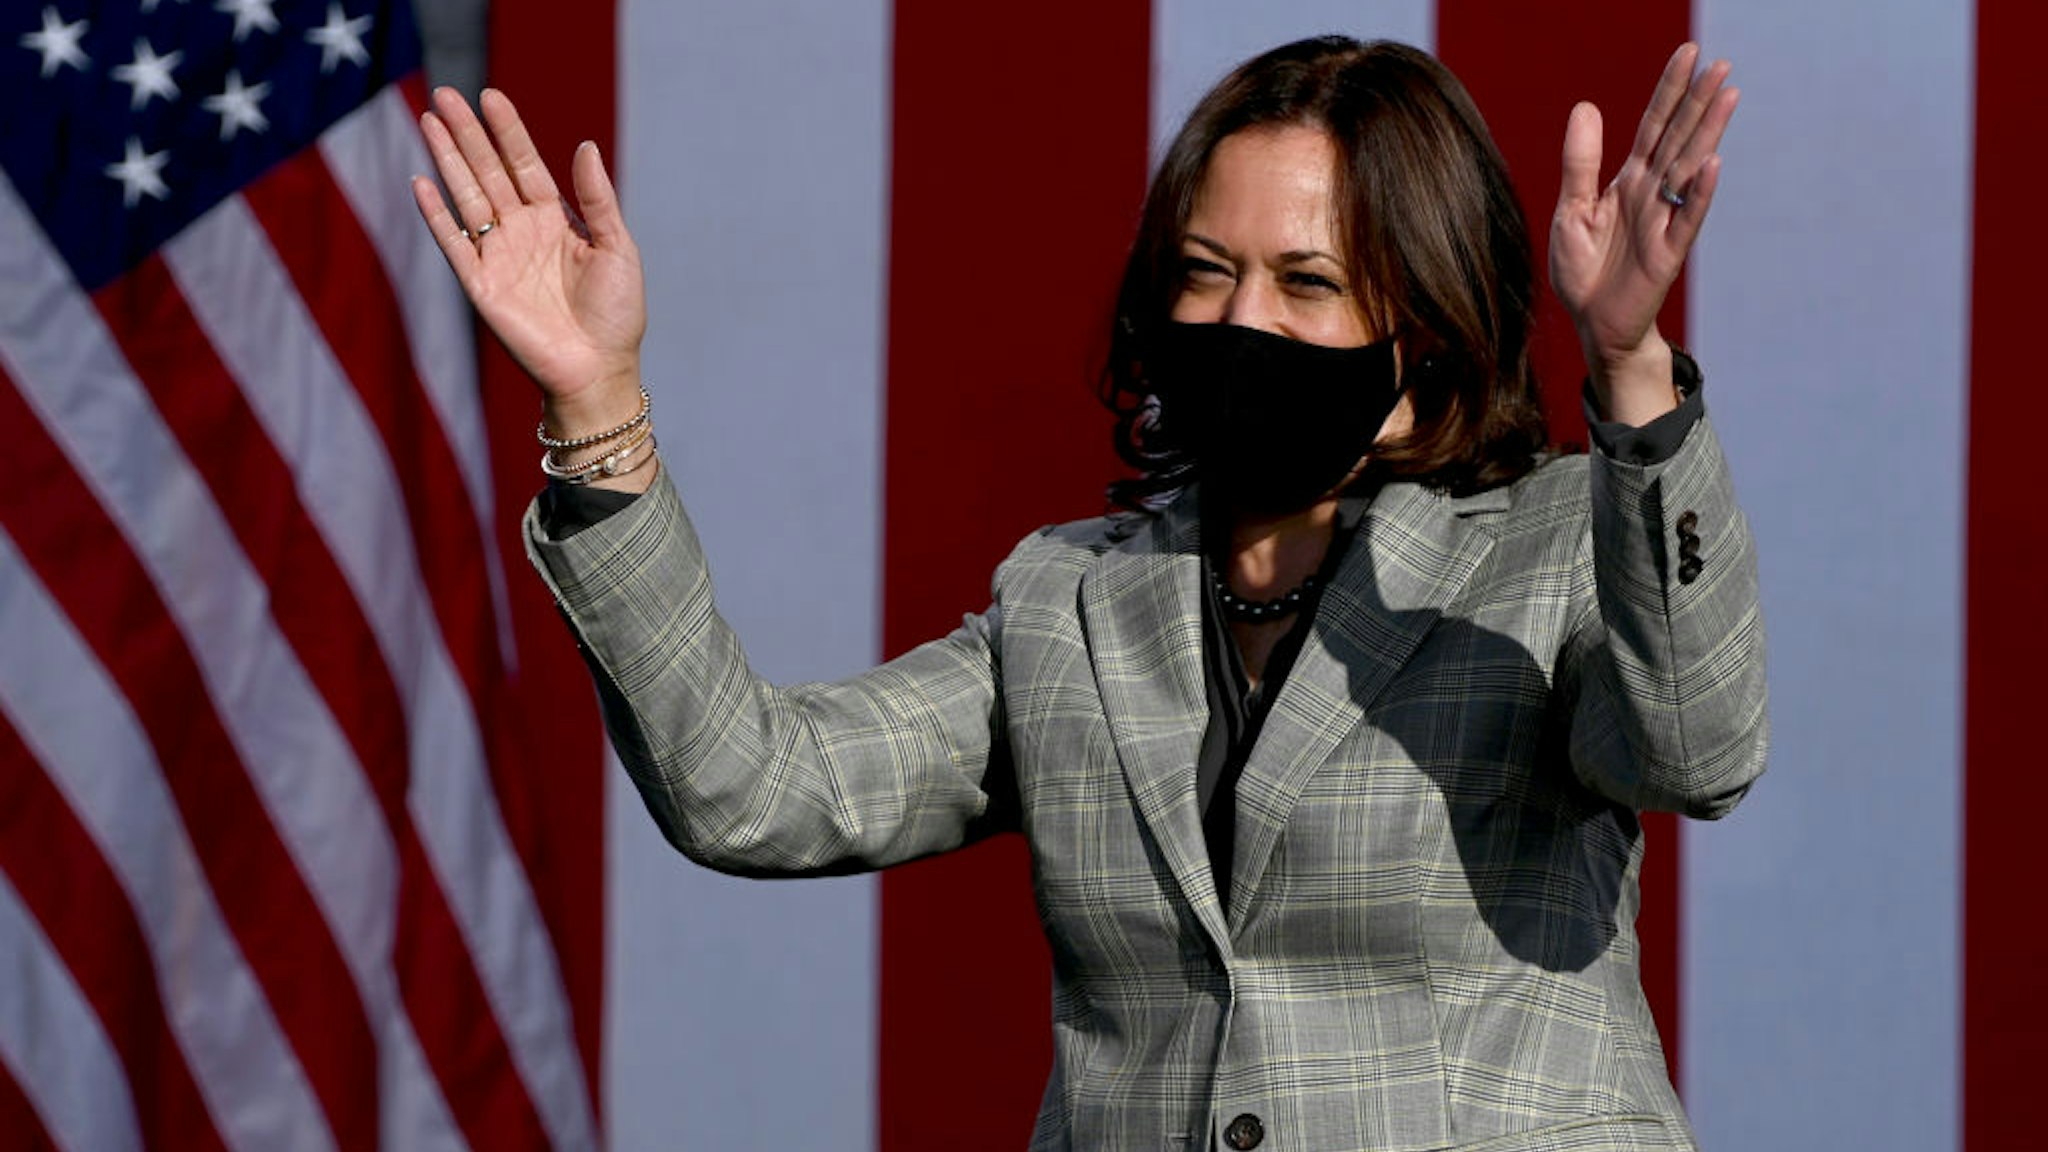 Democratic U.S. Vice Presidential nominee Sen. Kamala Harris (D-CA) waves as she arrives at a voter mobilization drive-in event at UNLV on October 2, 2020 in Las Vegas, Nevada.